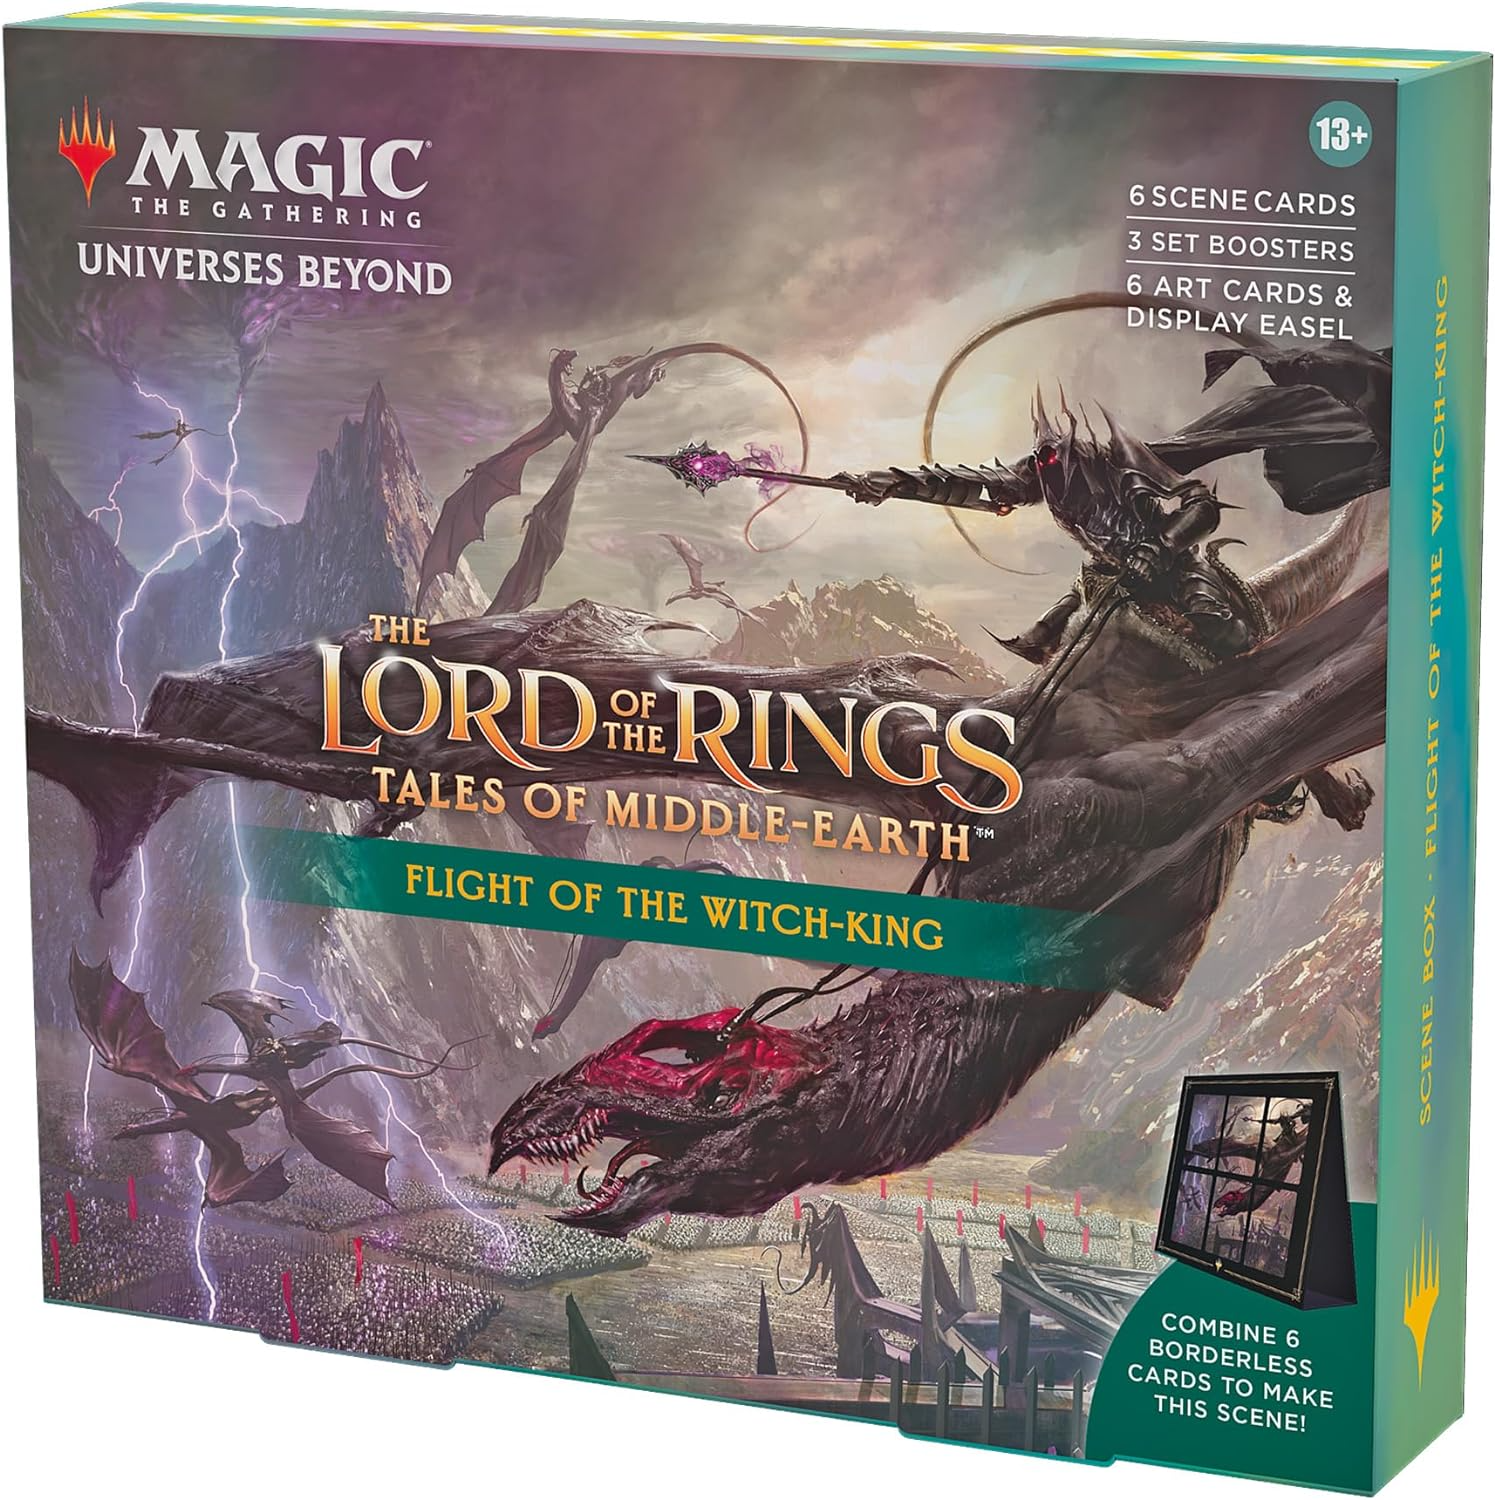 The Lord of the Rings: Tales of Middle-Earth Scene Box (Flight of the Witch-King) | Yard's Games Ltd